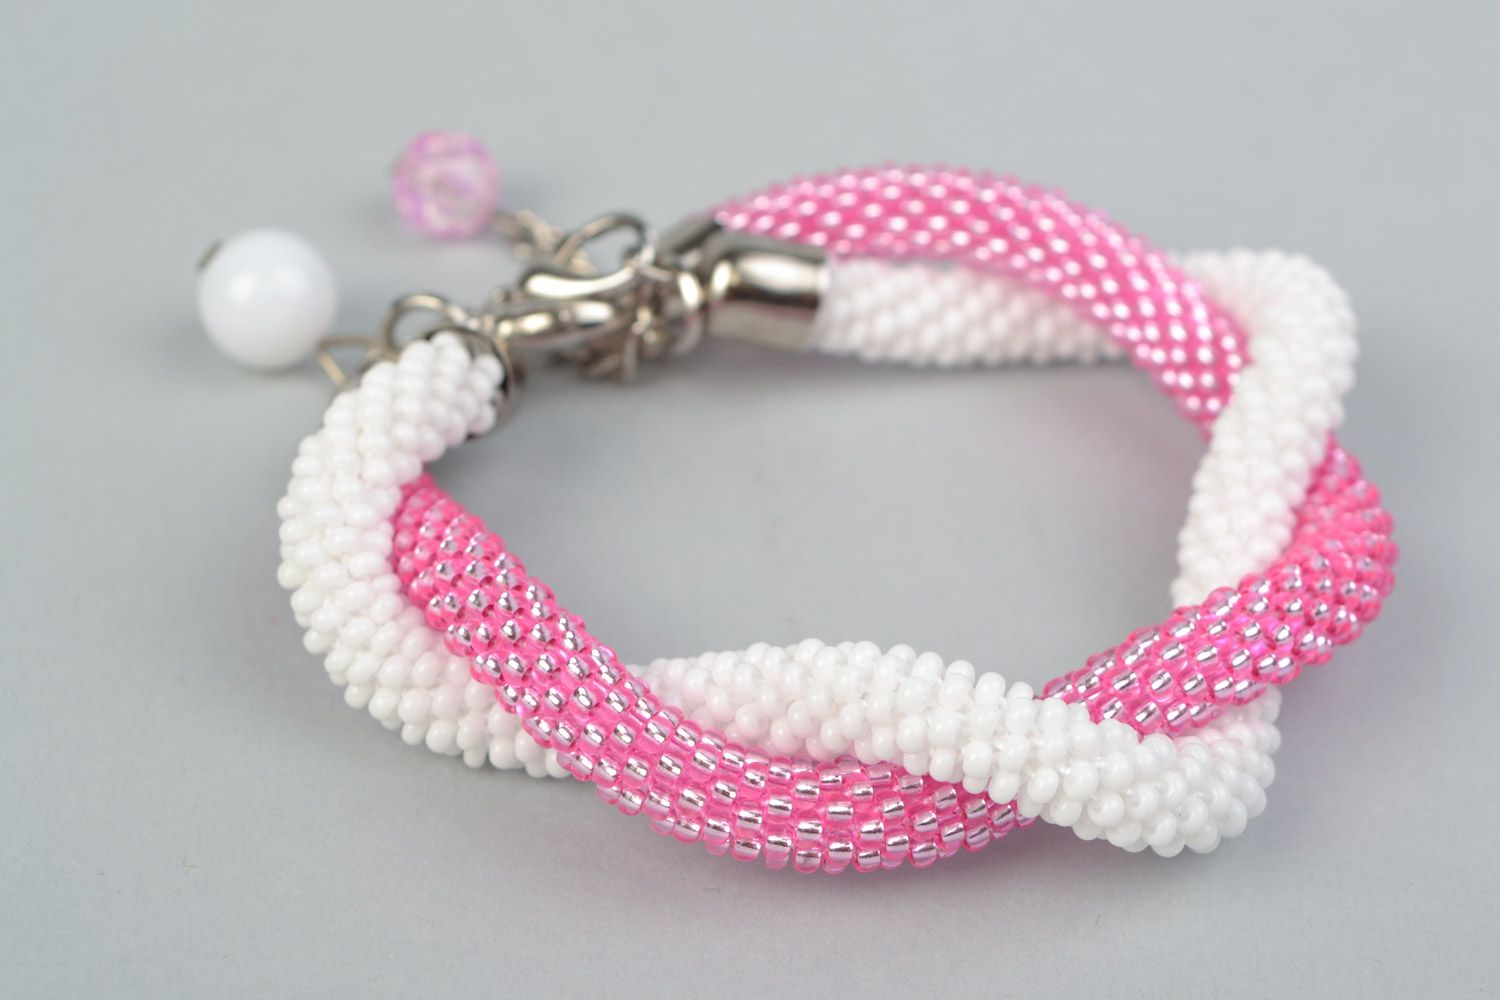 Set of 2 handmade beaded cord women's wrist bracelets in pink and white colors photo 5